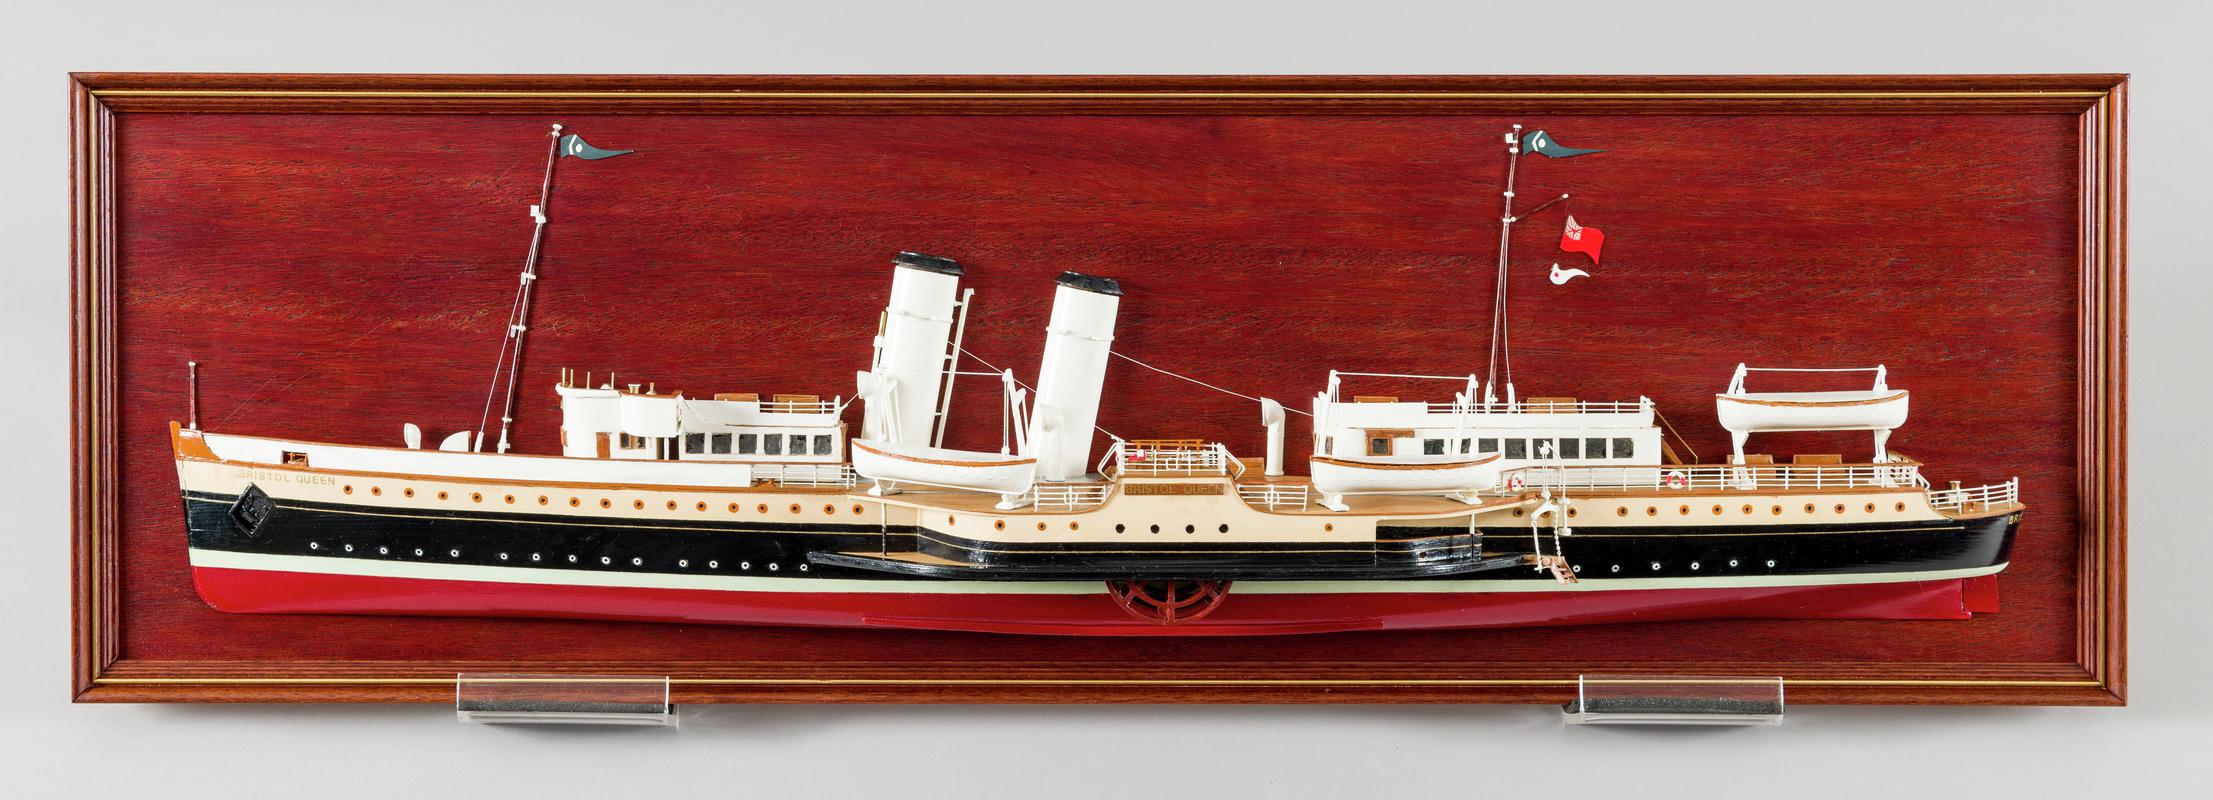 Half hull model of the P.S. BRITSOL QUEEN.